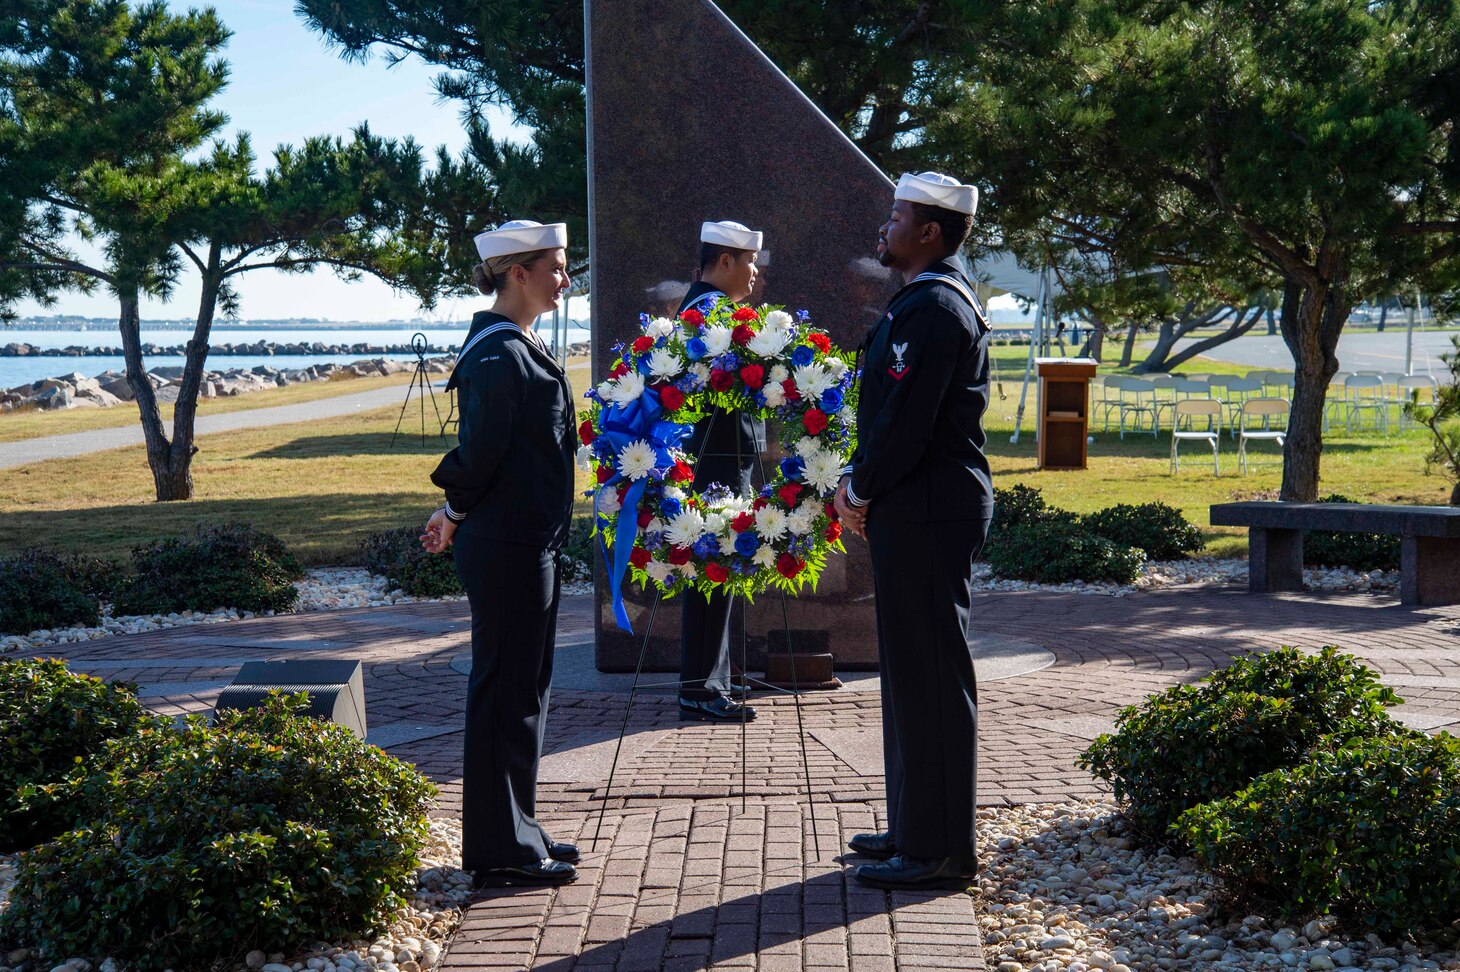 221012-N-CY569-0003 NORFOLK, Va. (Oct. 12, 2022) Sailors assigned to the Arleigh Burke-class, guided-missile destroyer USS Cole (DDG 67) place a wreath at the USS Cole Memorial. Past and present Cole crew members gathered alongside families and guests at the memorial onboard Naval Station Norfolk to commemorate the 22nd anniversary of the ship's bombing on October 12, 2000. (U.S. Navy photo by Mass Communication Specialist 3rd Class Anthony Robledo)